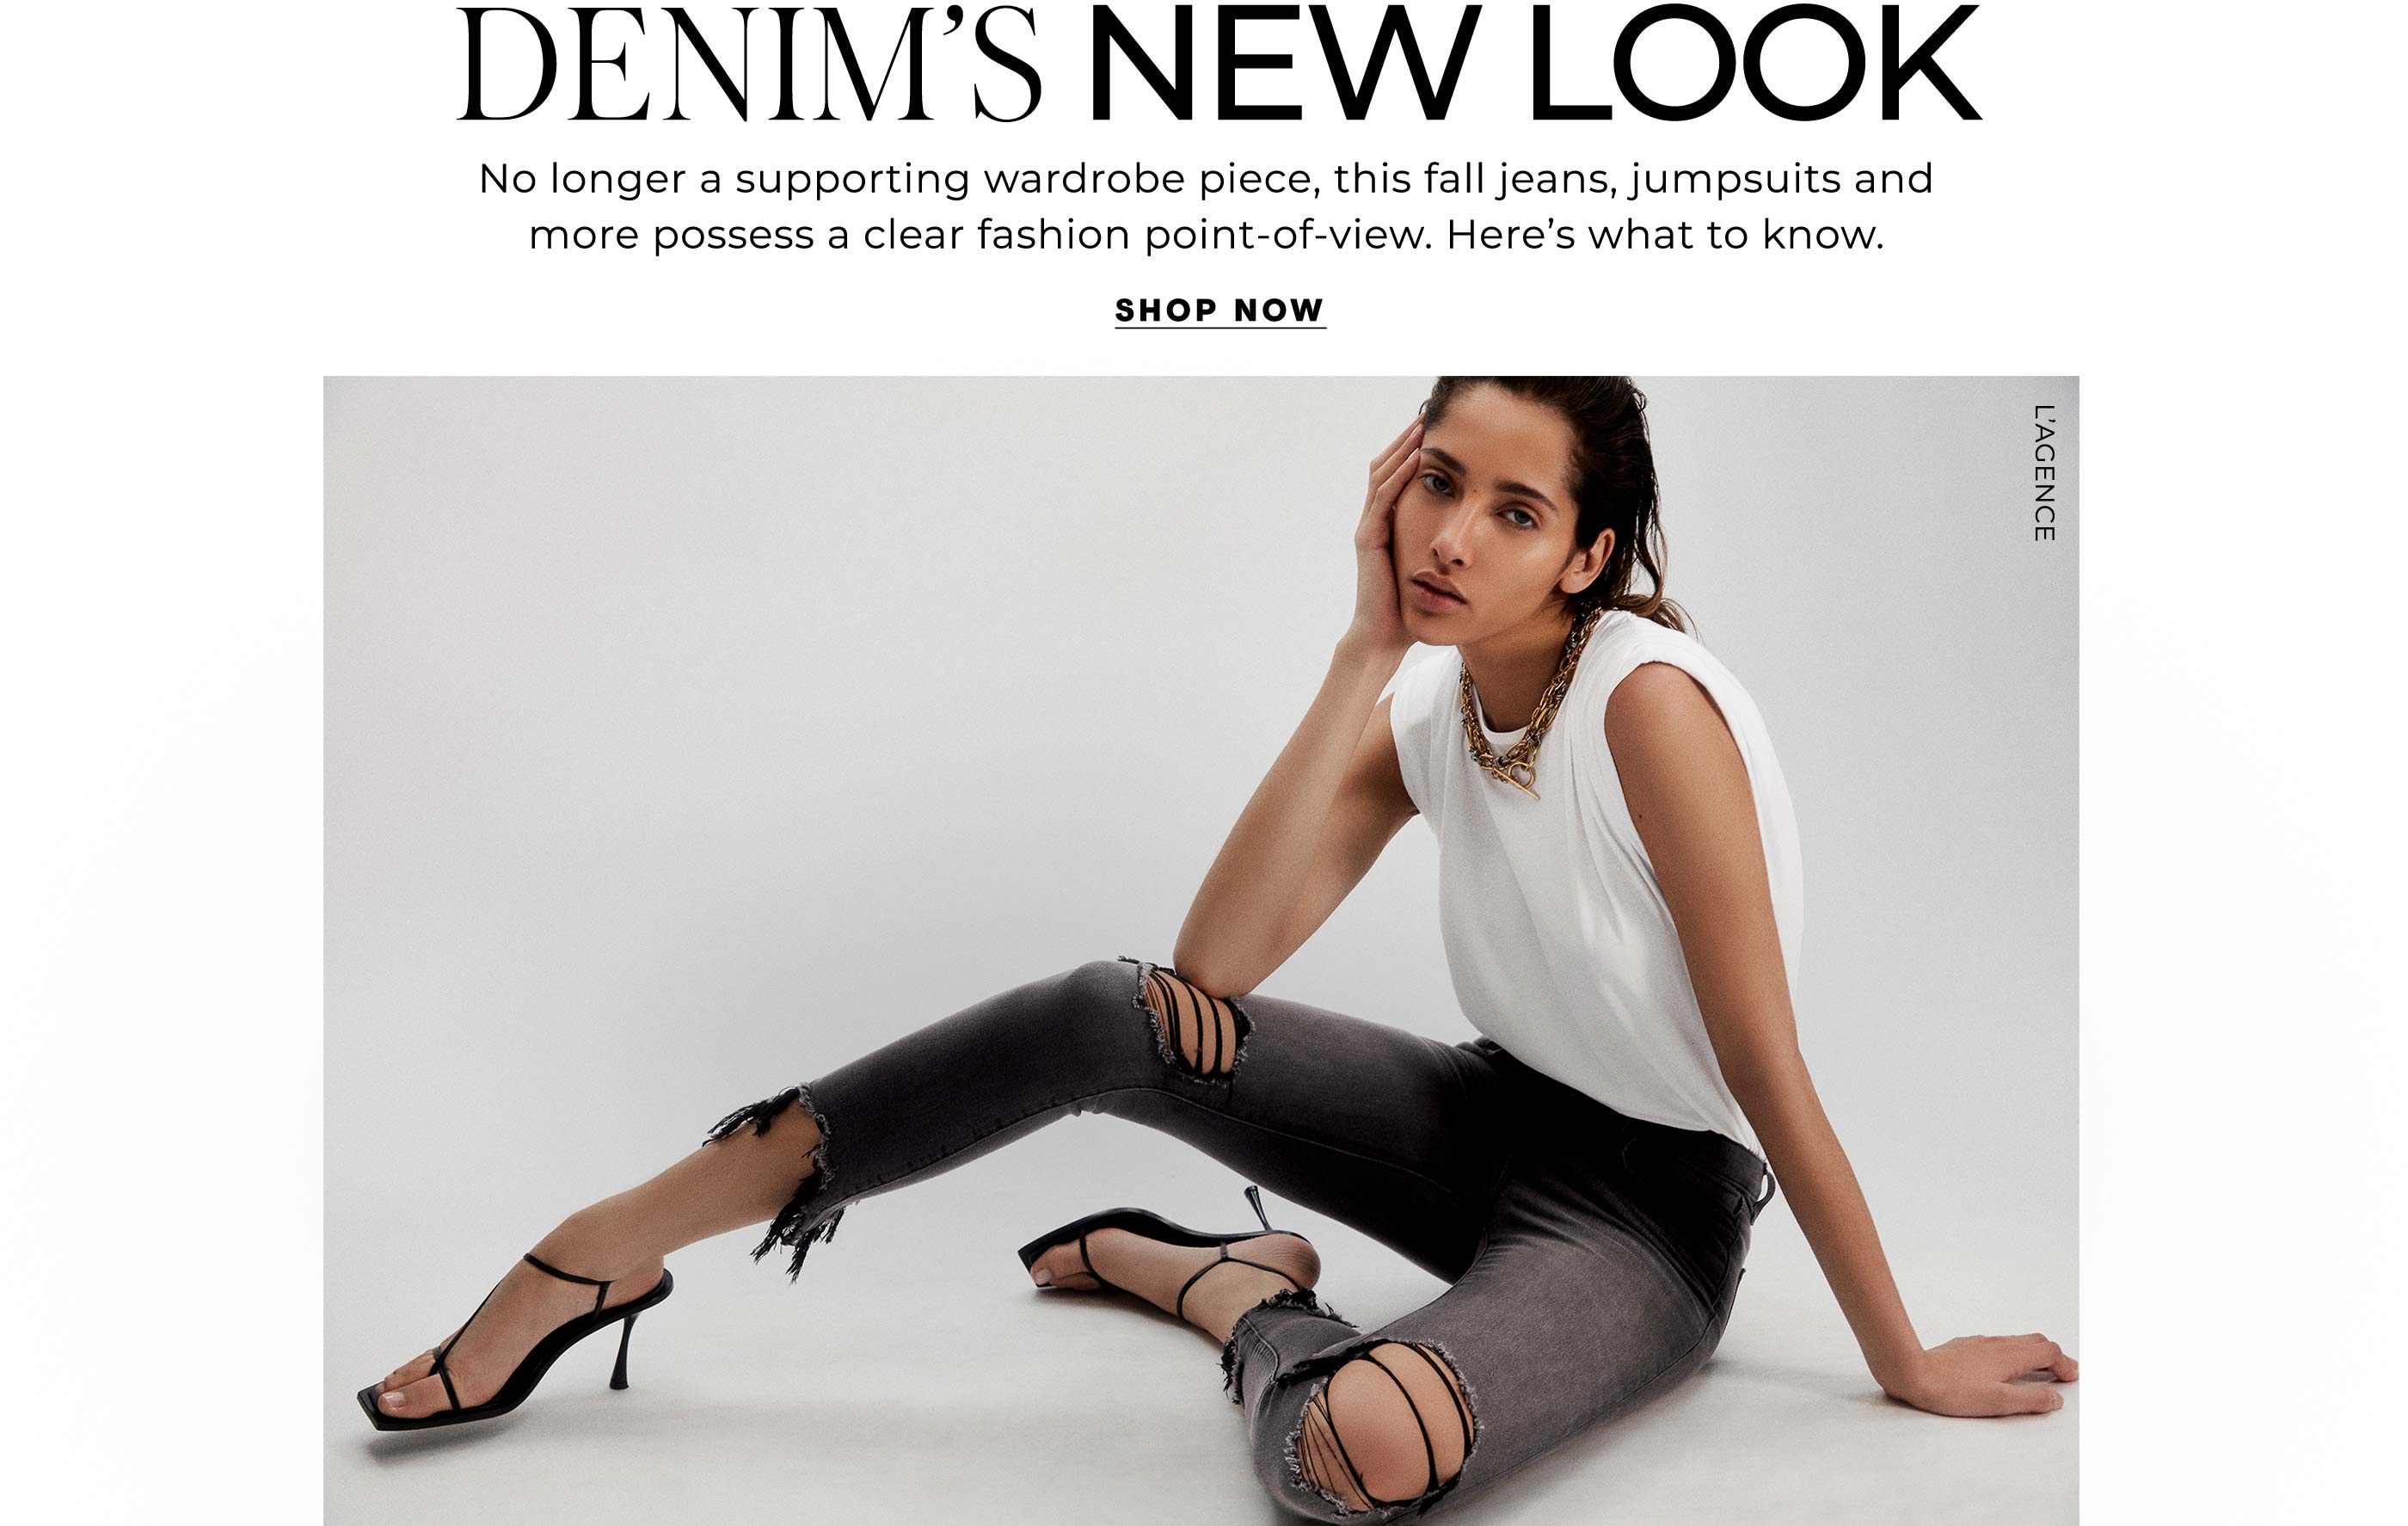 "Denim’s New Look No longer a supporting wardrobe piece, this fall jeans, jumpsuits and more possess a clear fashion point-of-view. Here’s what to know."